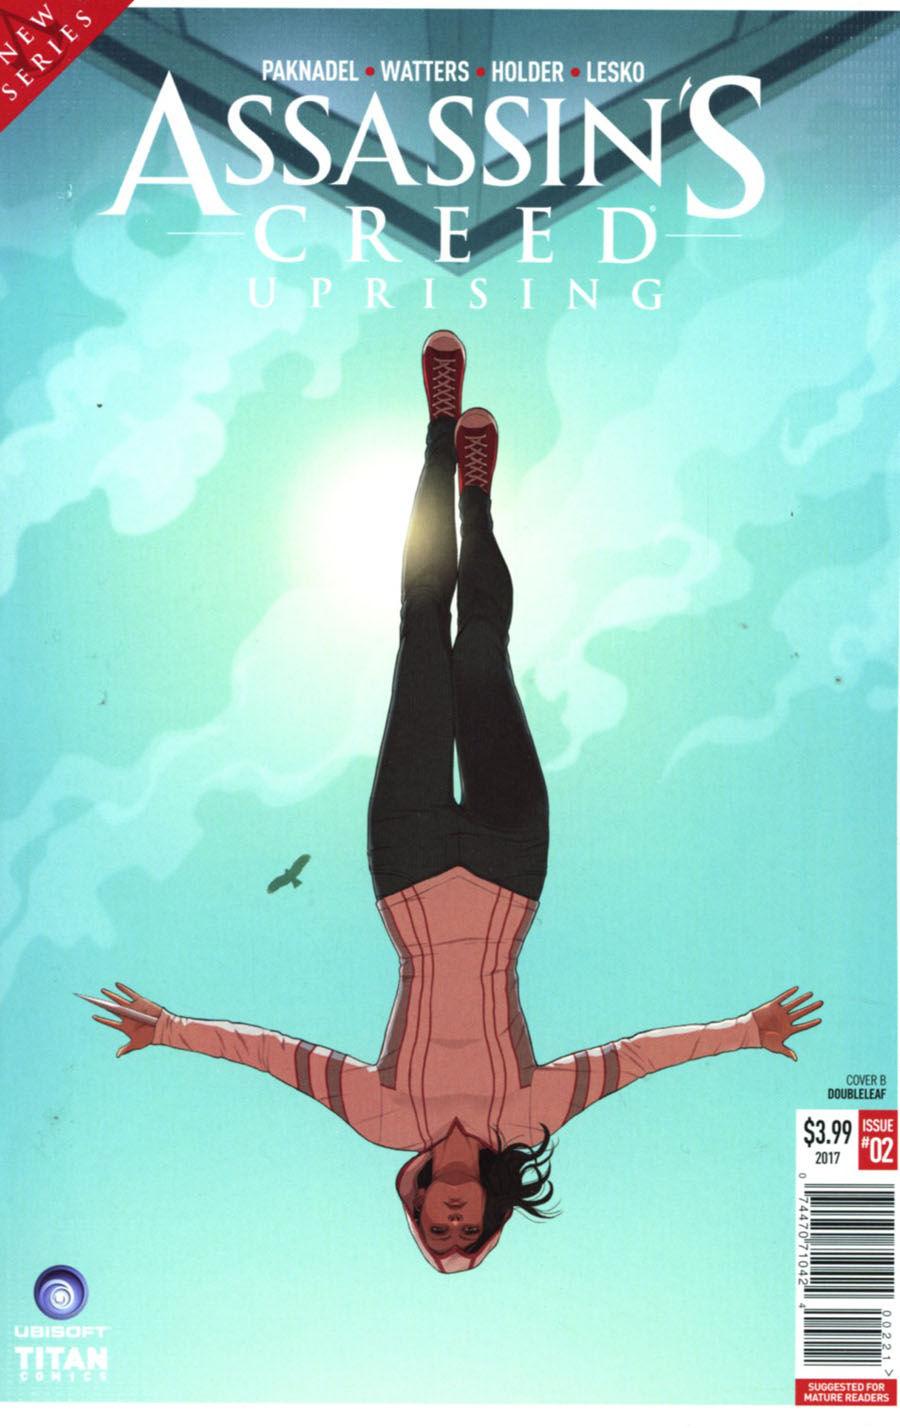 Assassins Creed Uprising #2 Cover B Variant Doubleleaf Cover